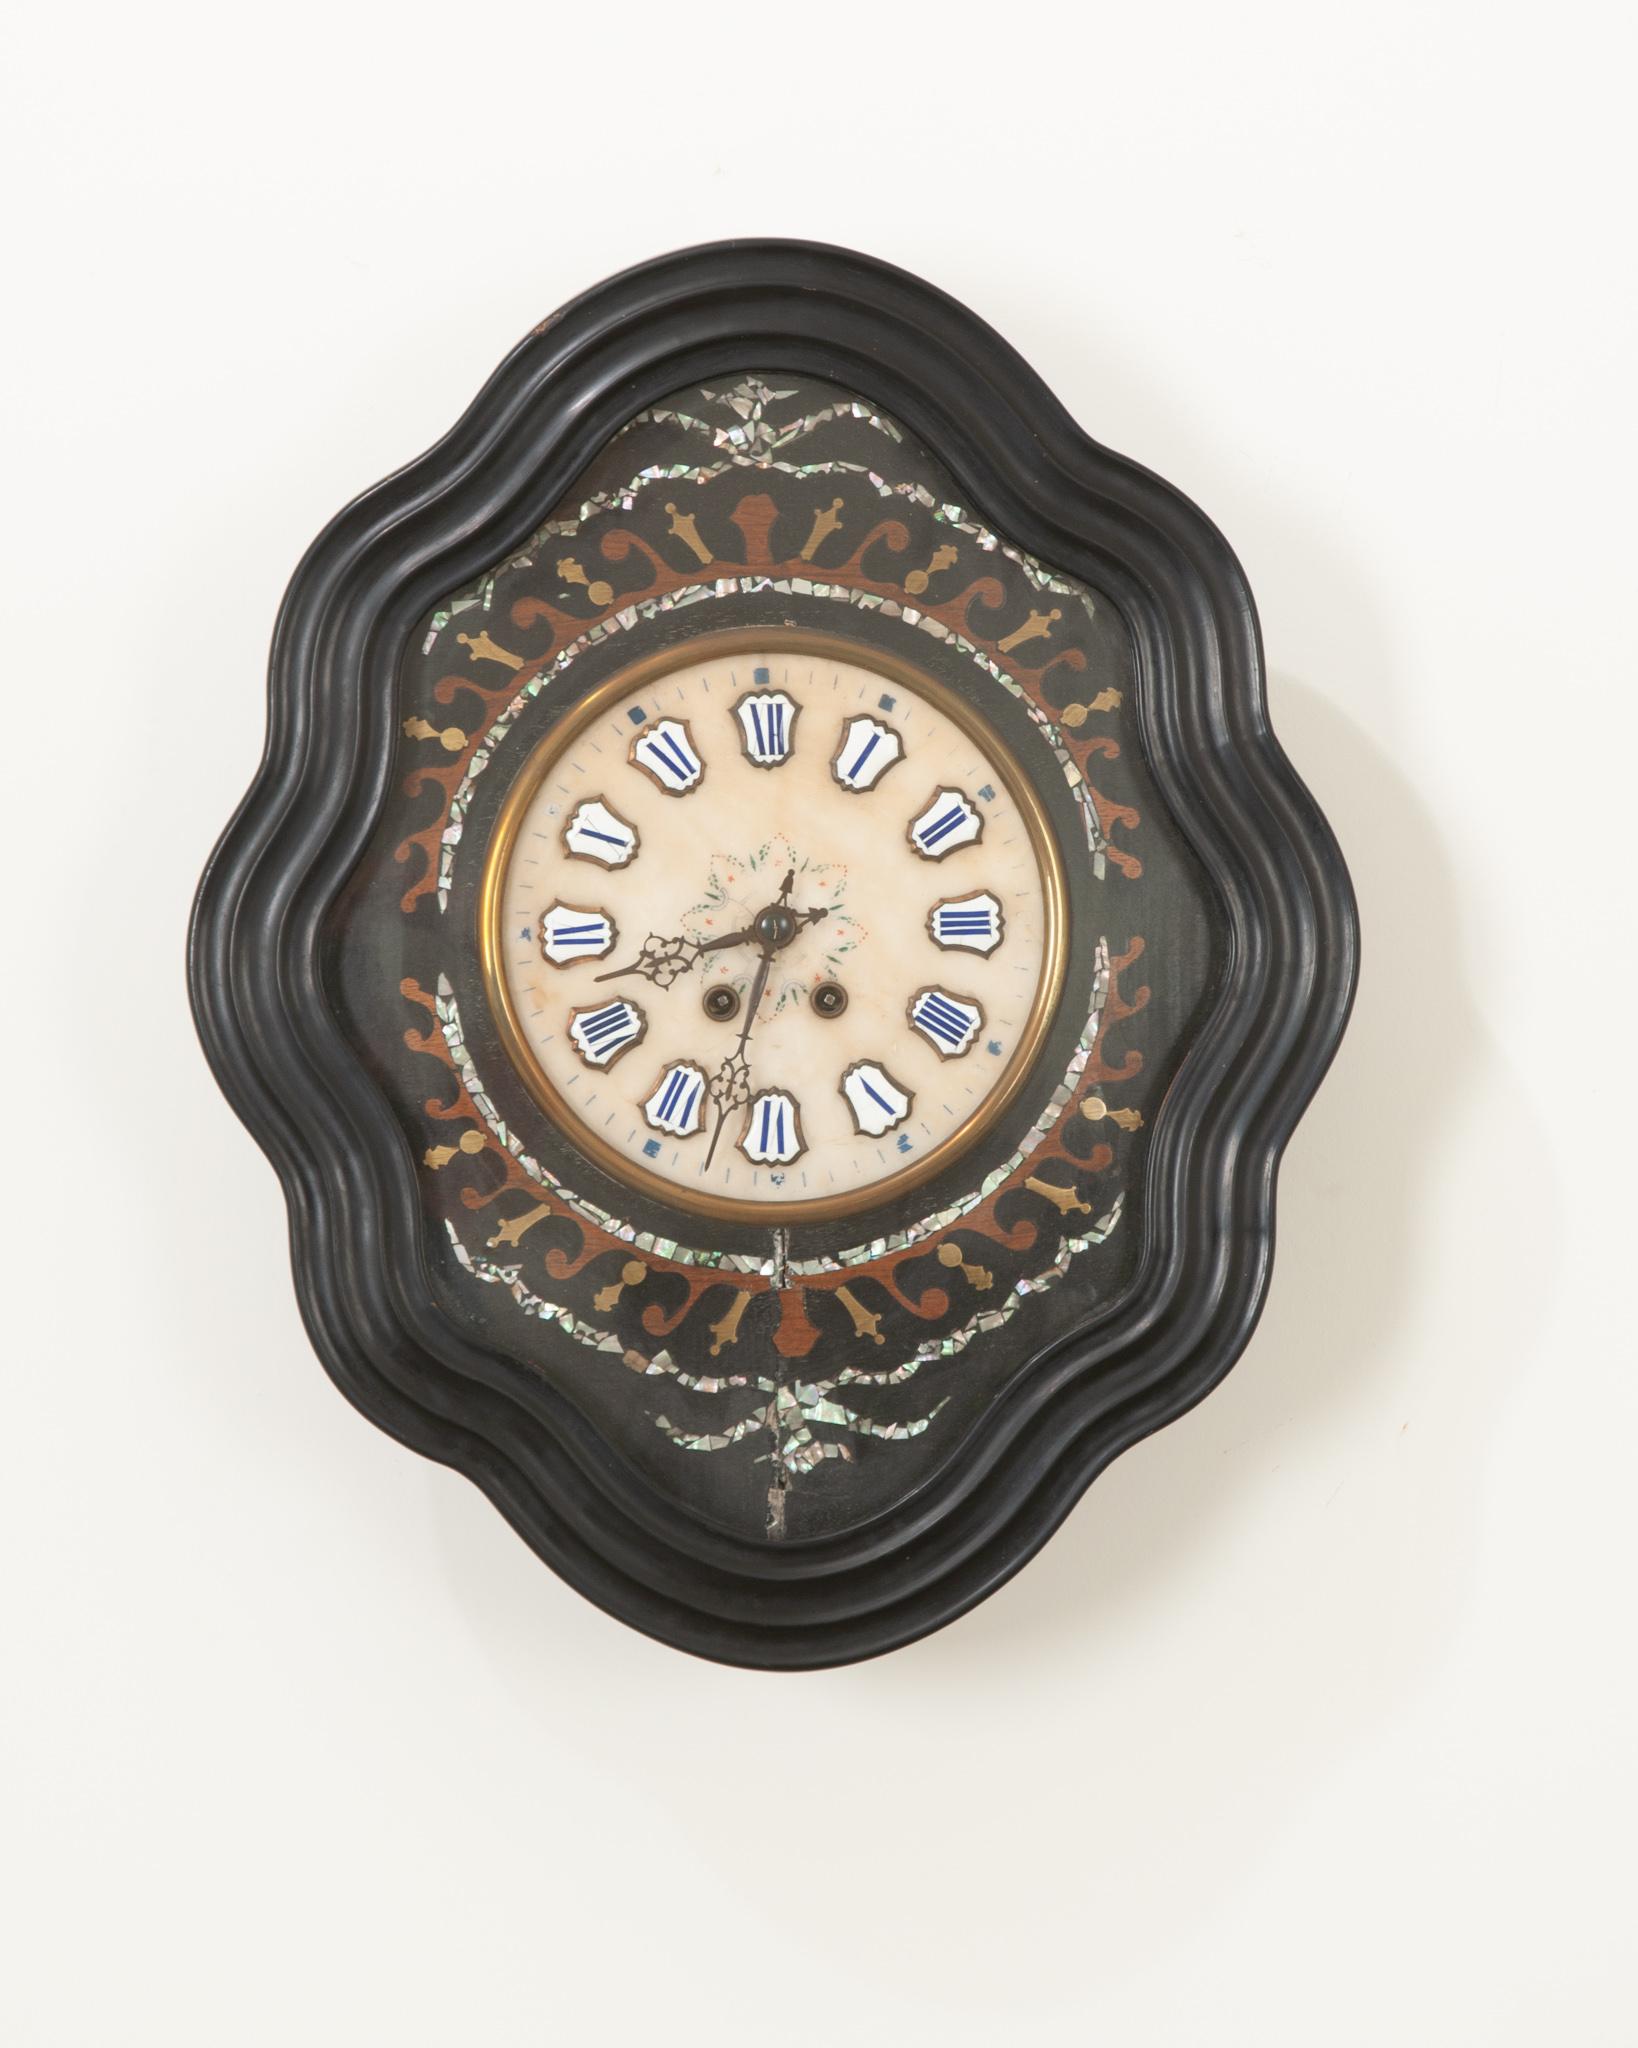 This 19th century clock is stunning with its diamond-shaped rippling clock frame of ebony-painted wood. Mother-of-pearl floral and foliate designs are inlaid in differently stained mahogany and brilliant mother-of-pearl, surrounding the porcelain